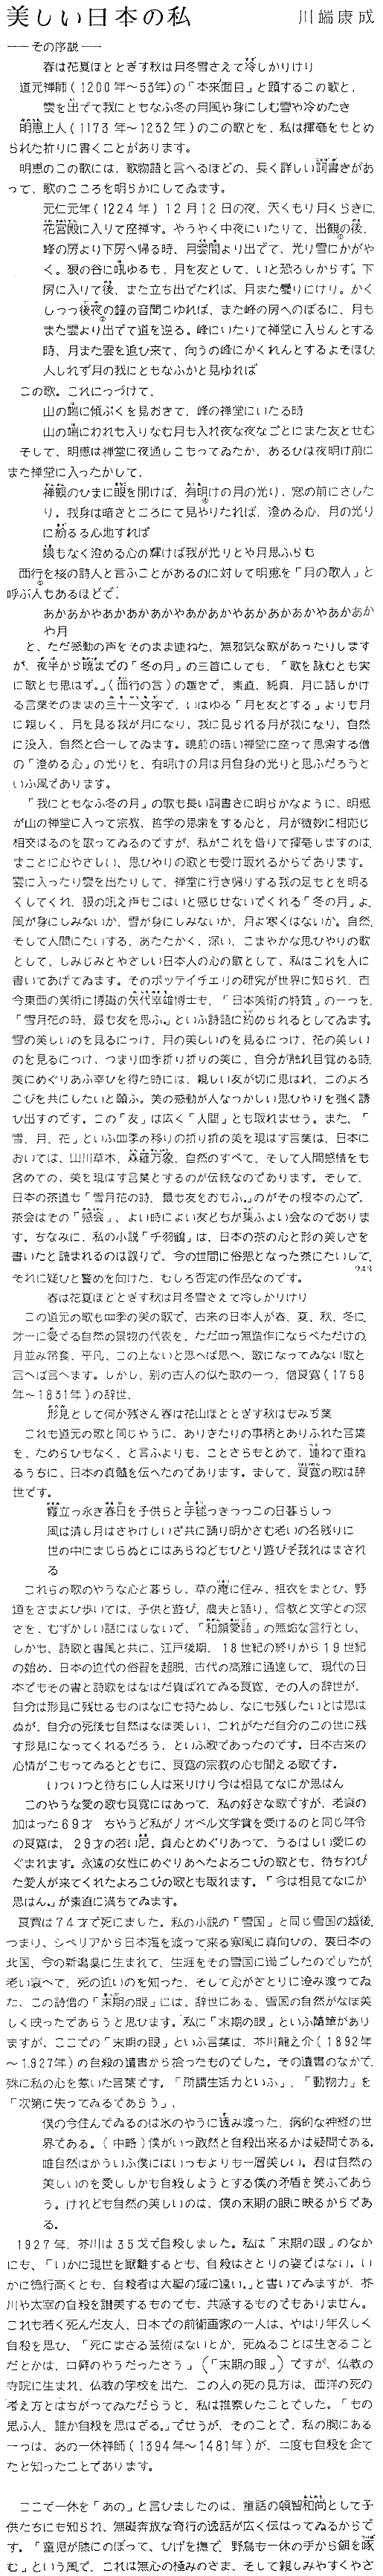 Nobel Lecture text in Japanese